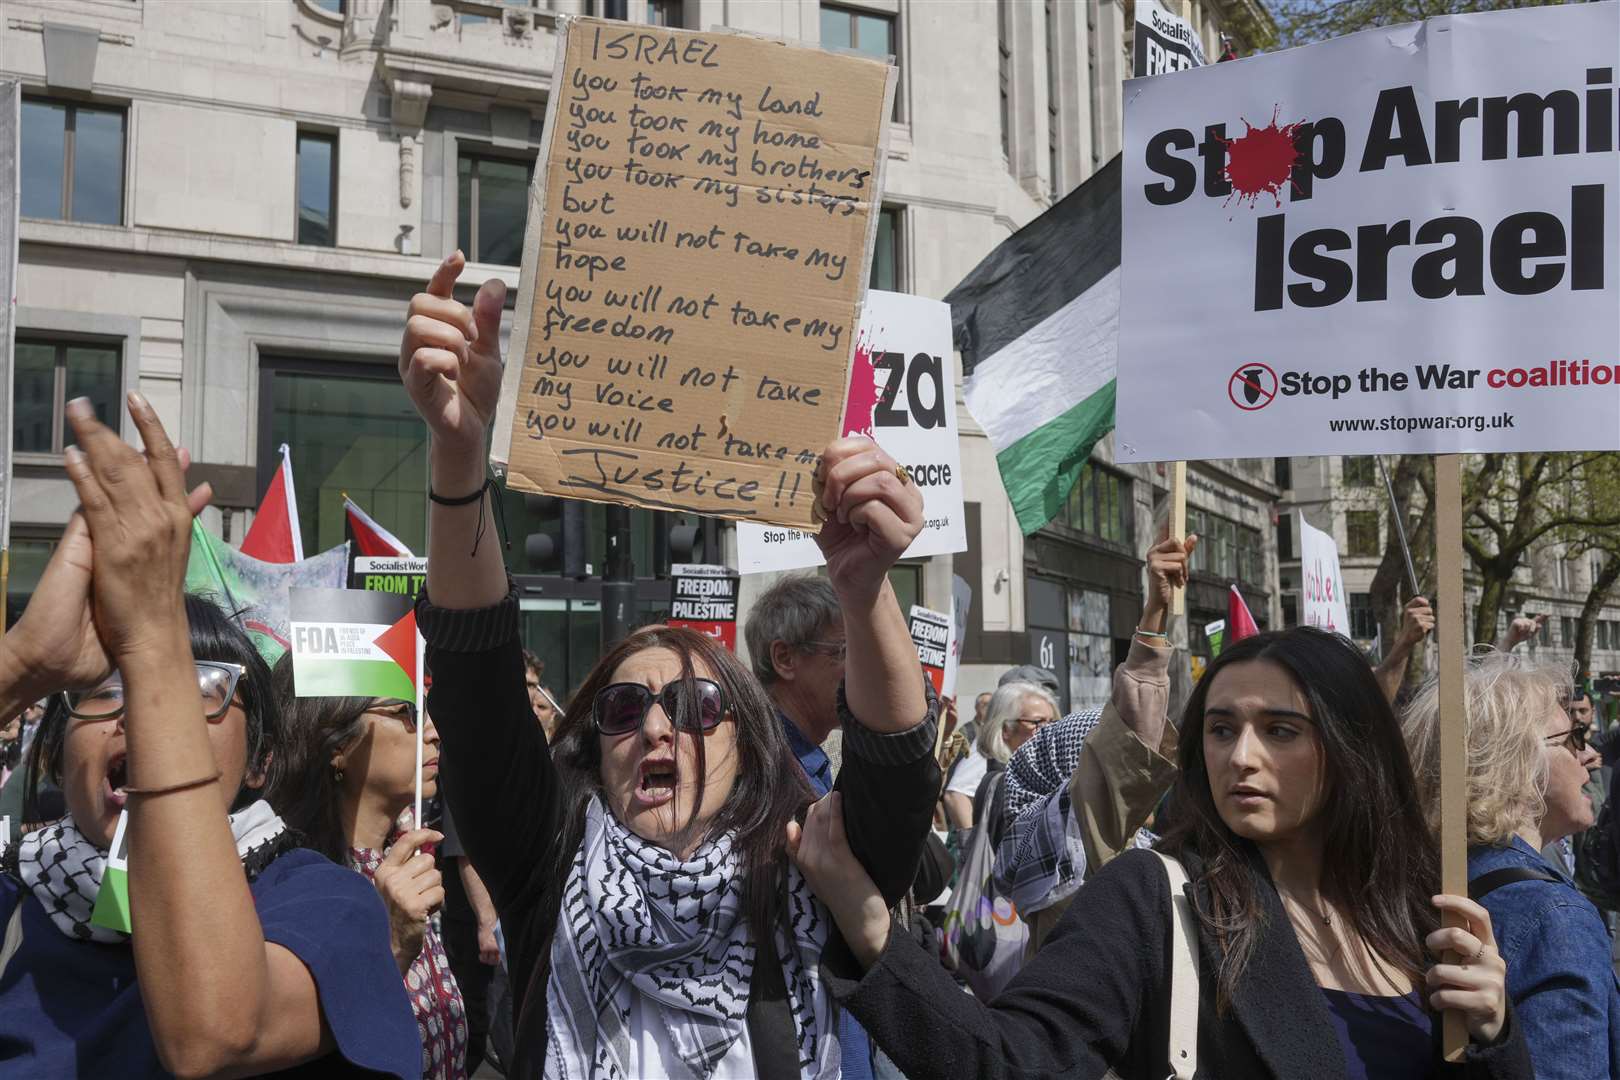 The Palestine Solidarity Campaign, which organised the Pro-Palestinian protest, said some 80,000 people attended the march (Jeff Moore/PA)